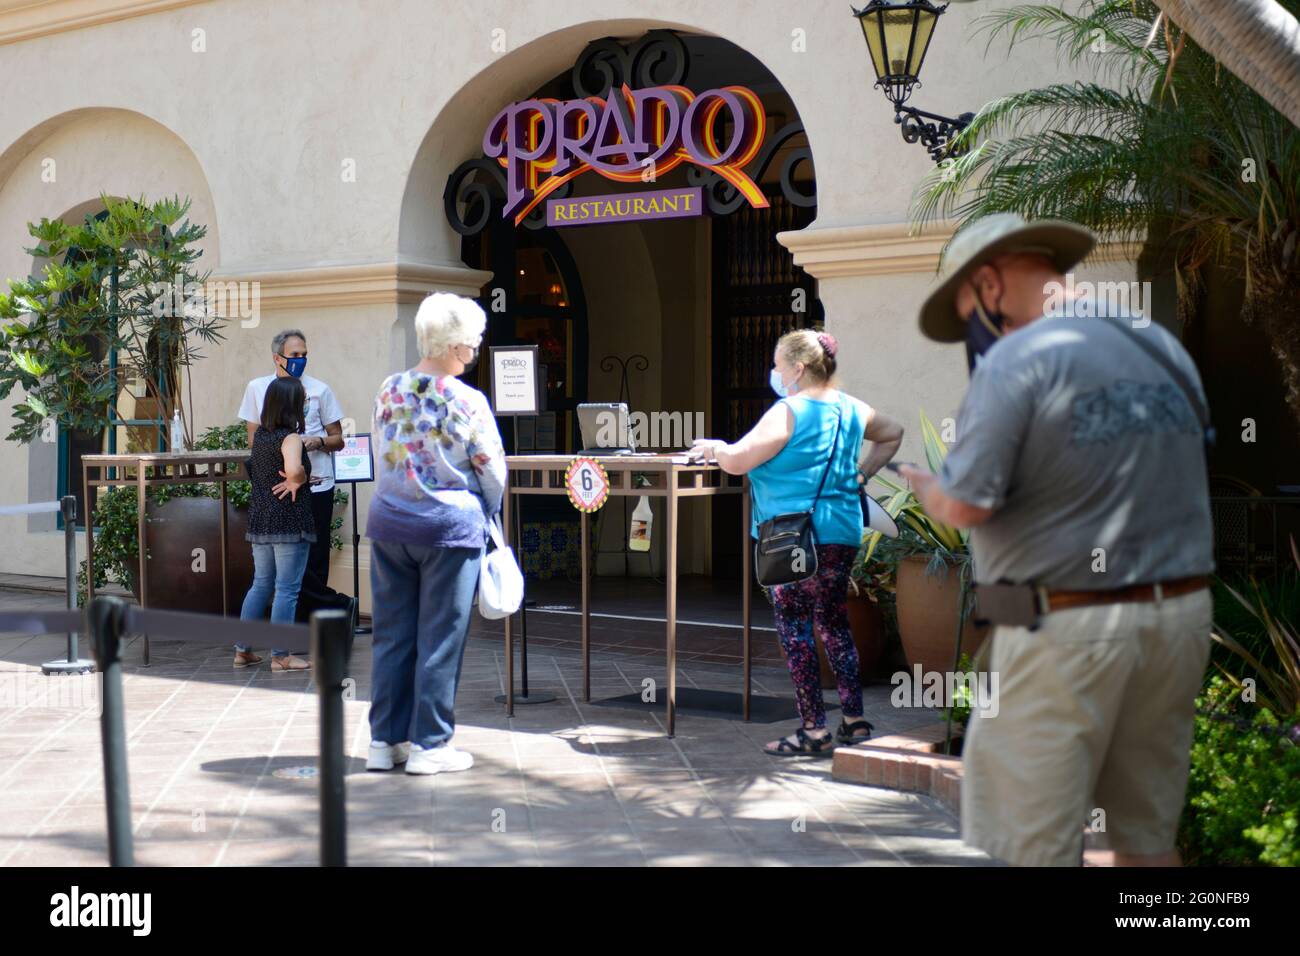 People wearing face masks standing outside the Prado Restaurant waiting for a table during the early post-covid days in Blboa Park, San Diego, CA Stock Photo